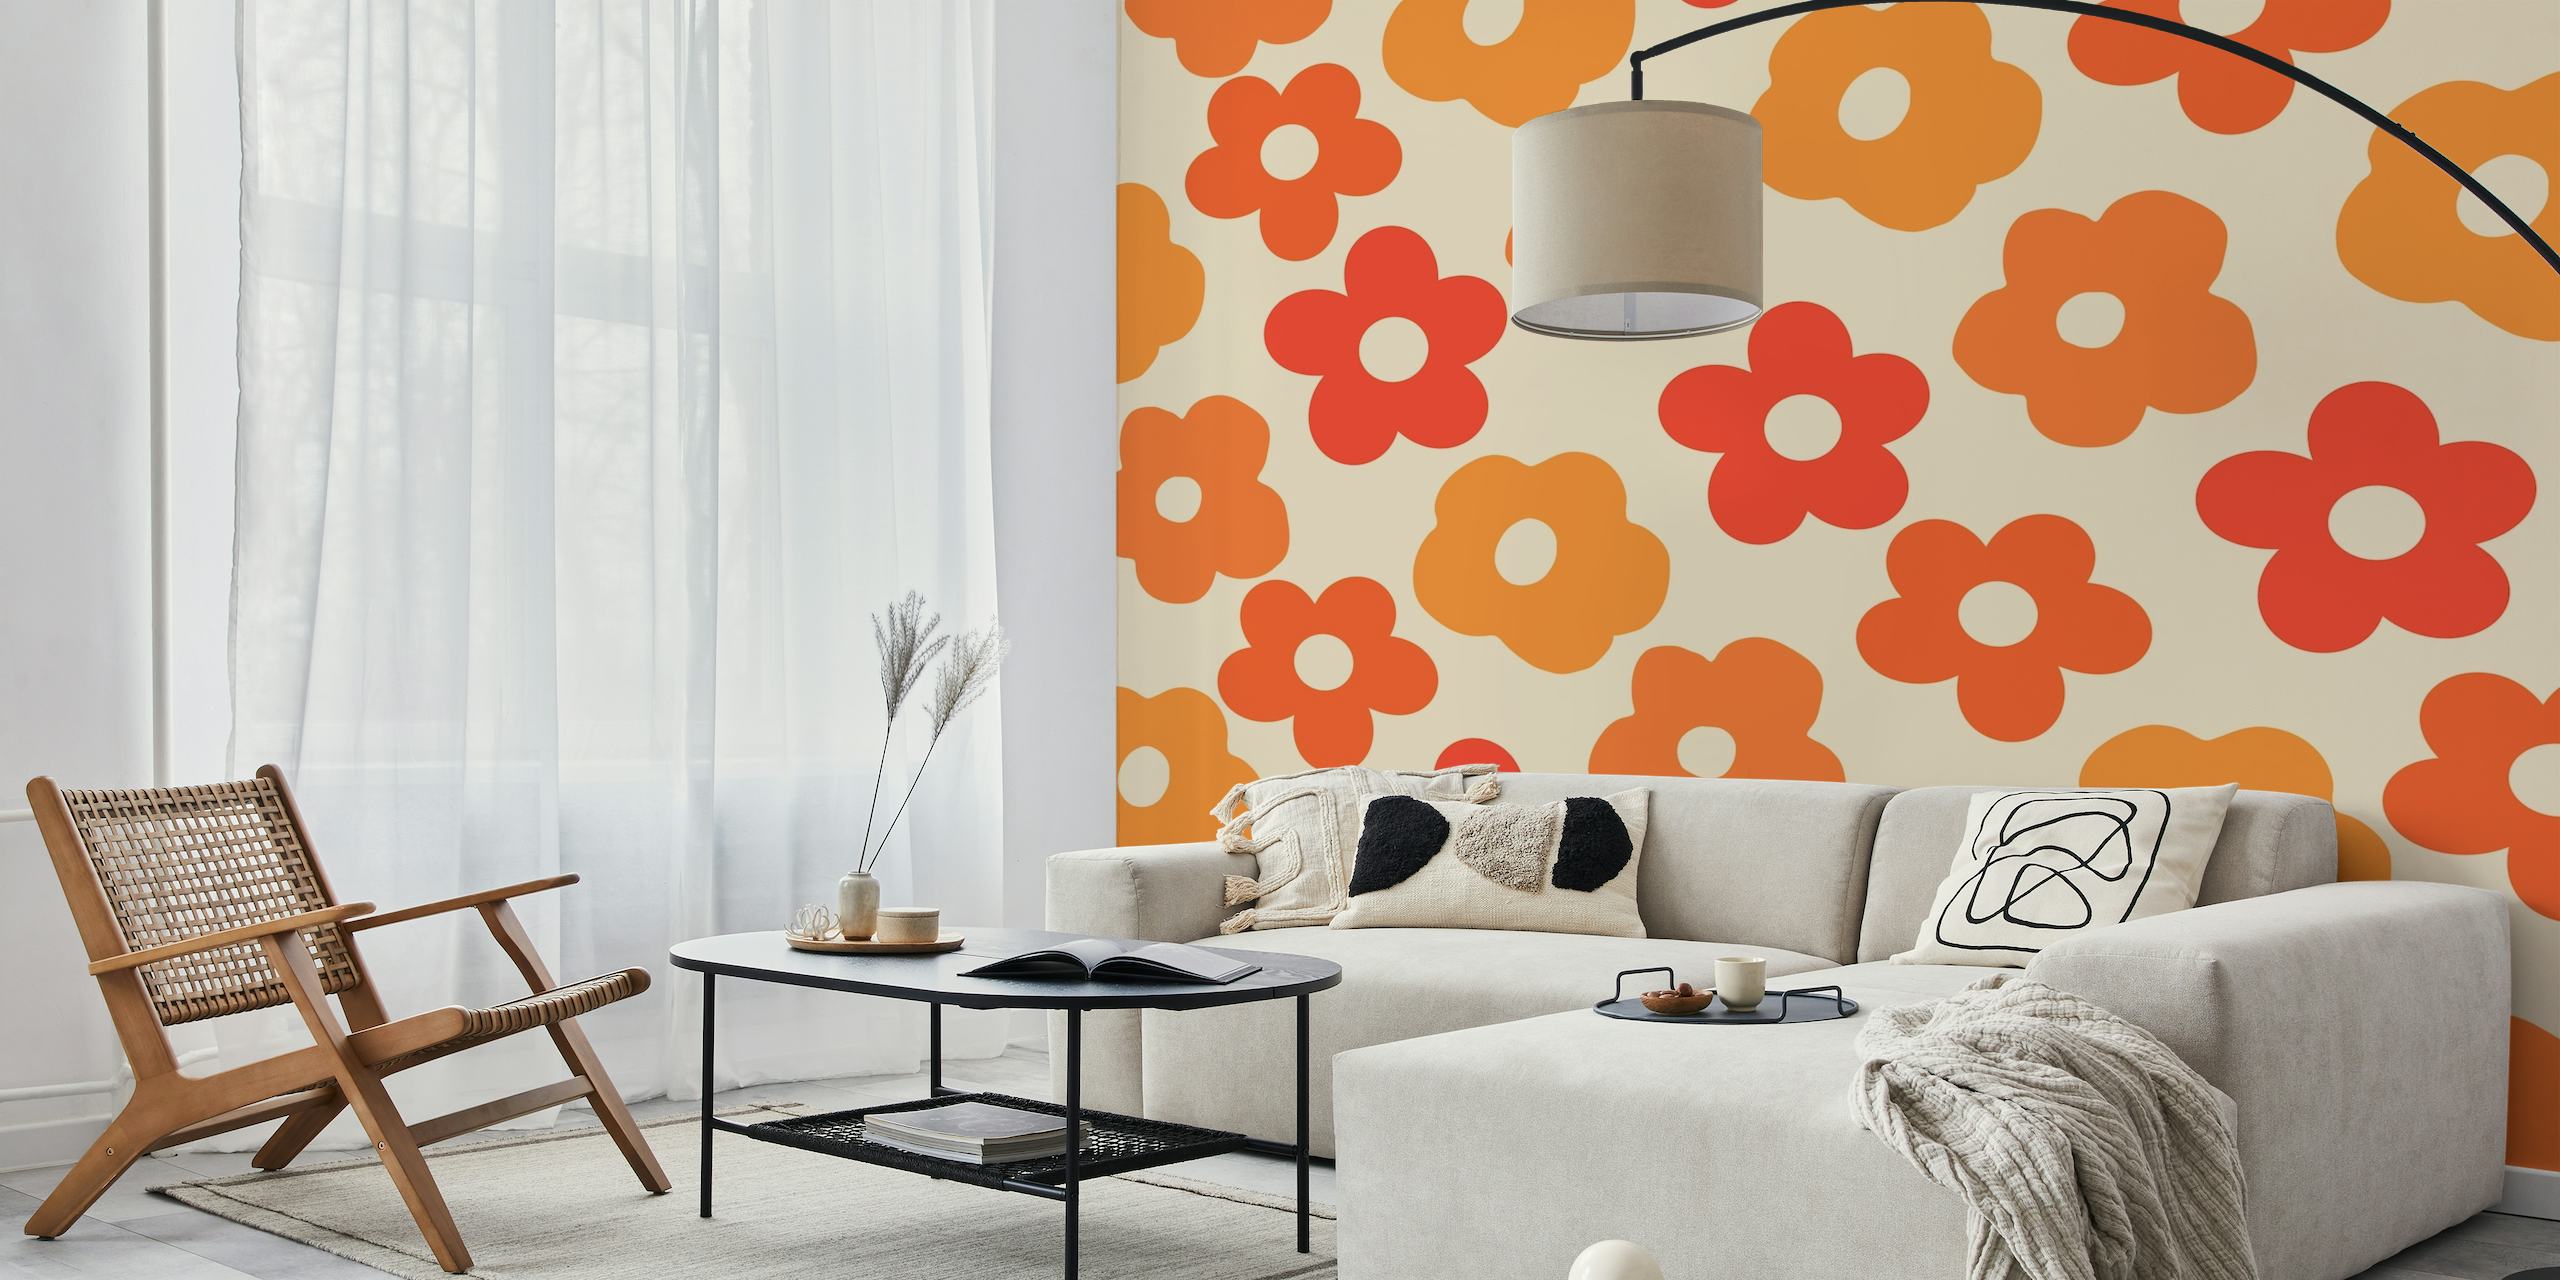 Retro Daisies 1970s Colors Wall Mural with Orange and Yellow Flowers on a Beige Background